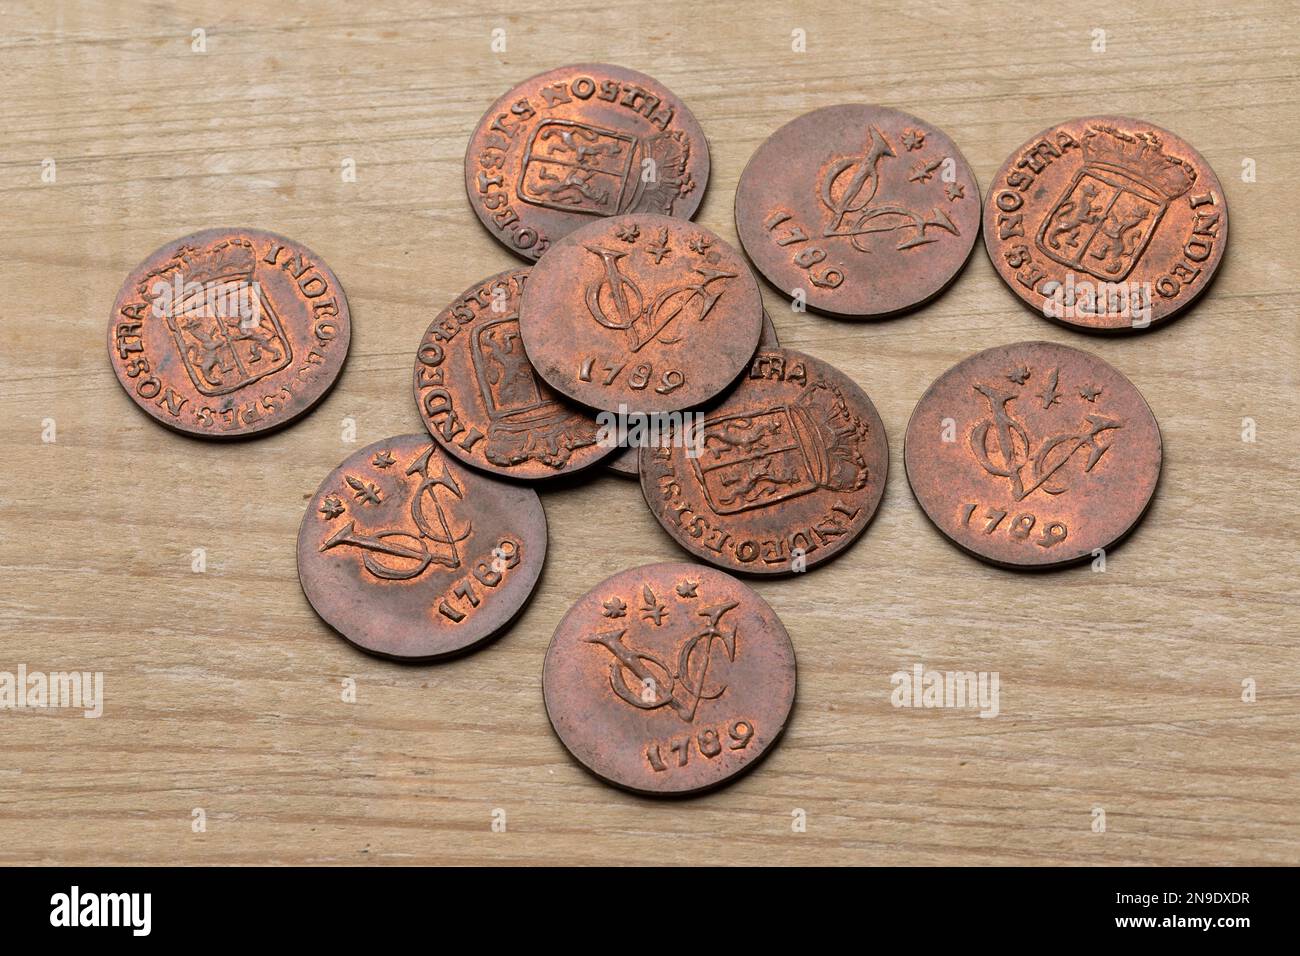 Heap of old antique Dutch VOC coins from 1789 on a wooden background close up Stock Photo